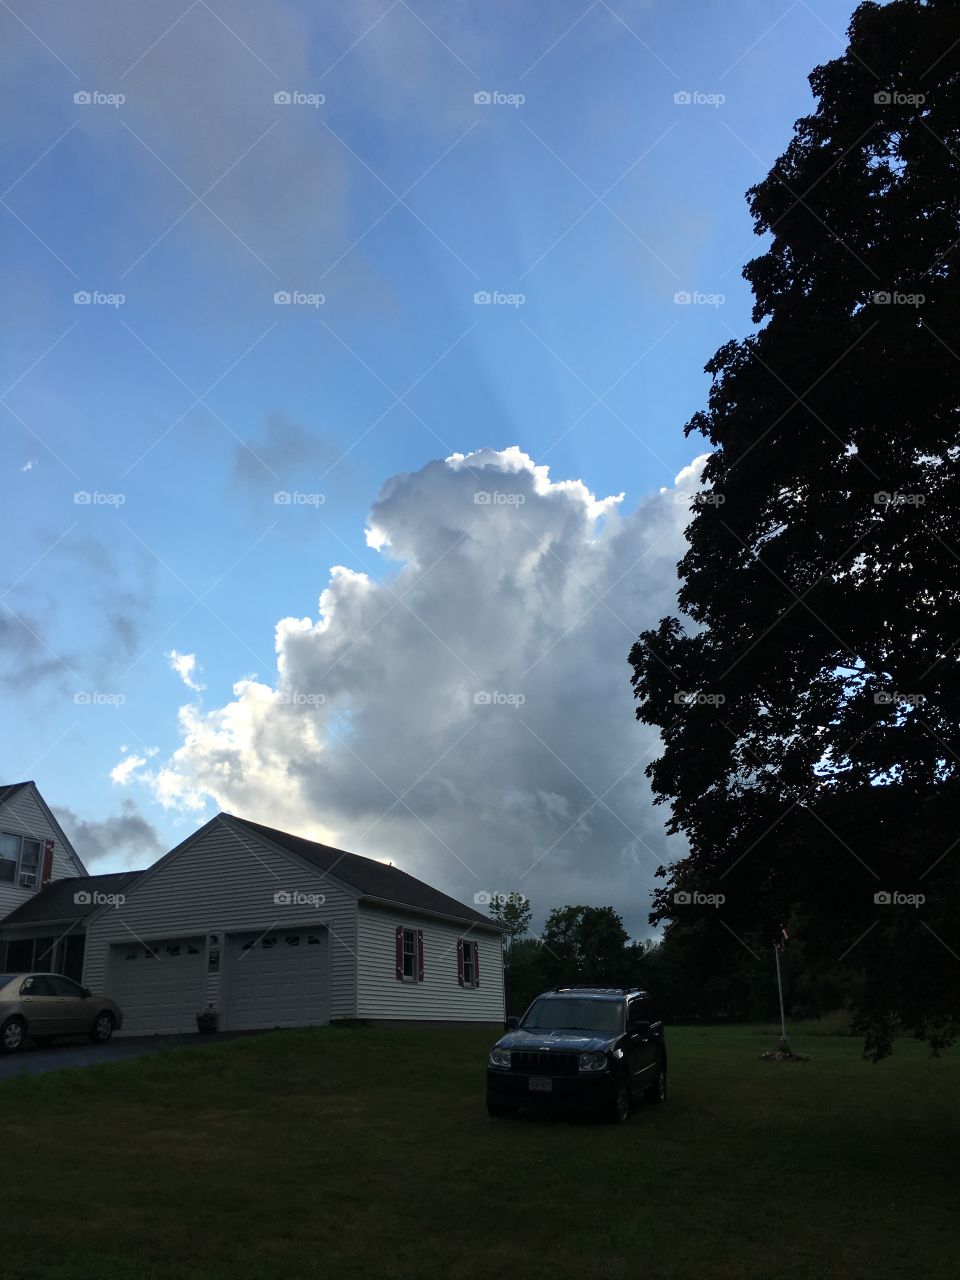 Bright clouds over the house